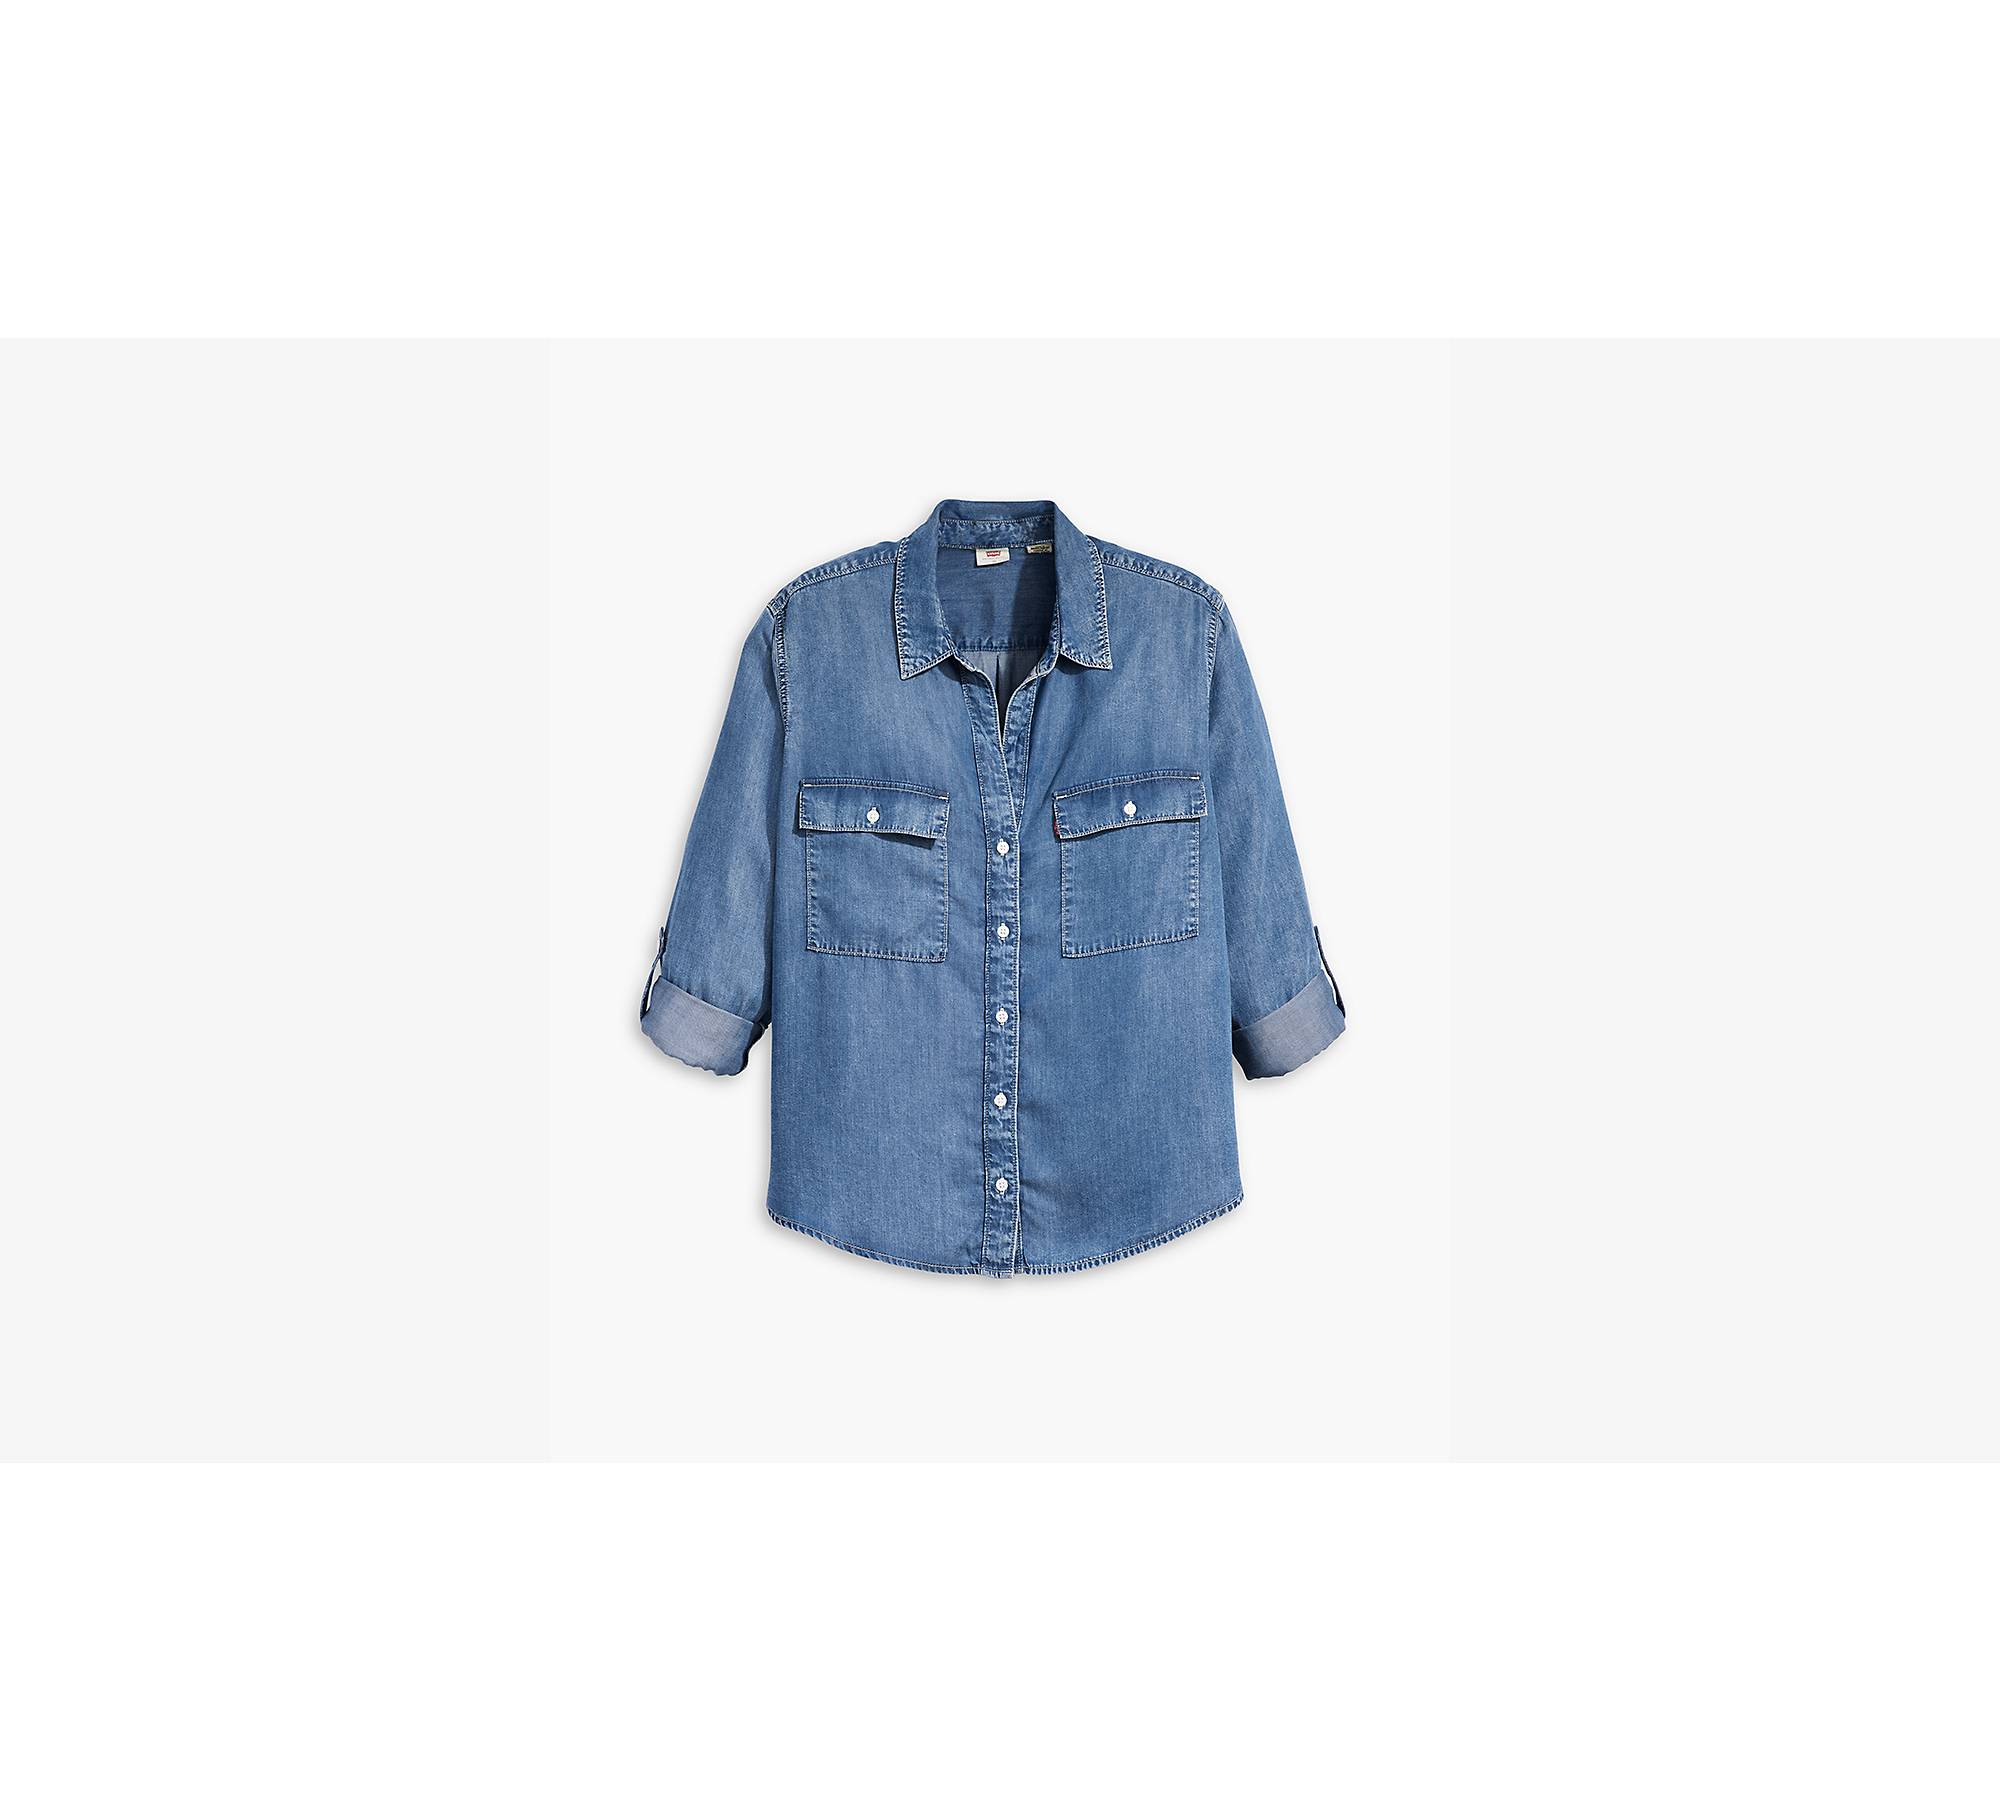 Levi's Doreen Utility Shirt (Plus Size) - Women's - in Patches 1x